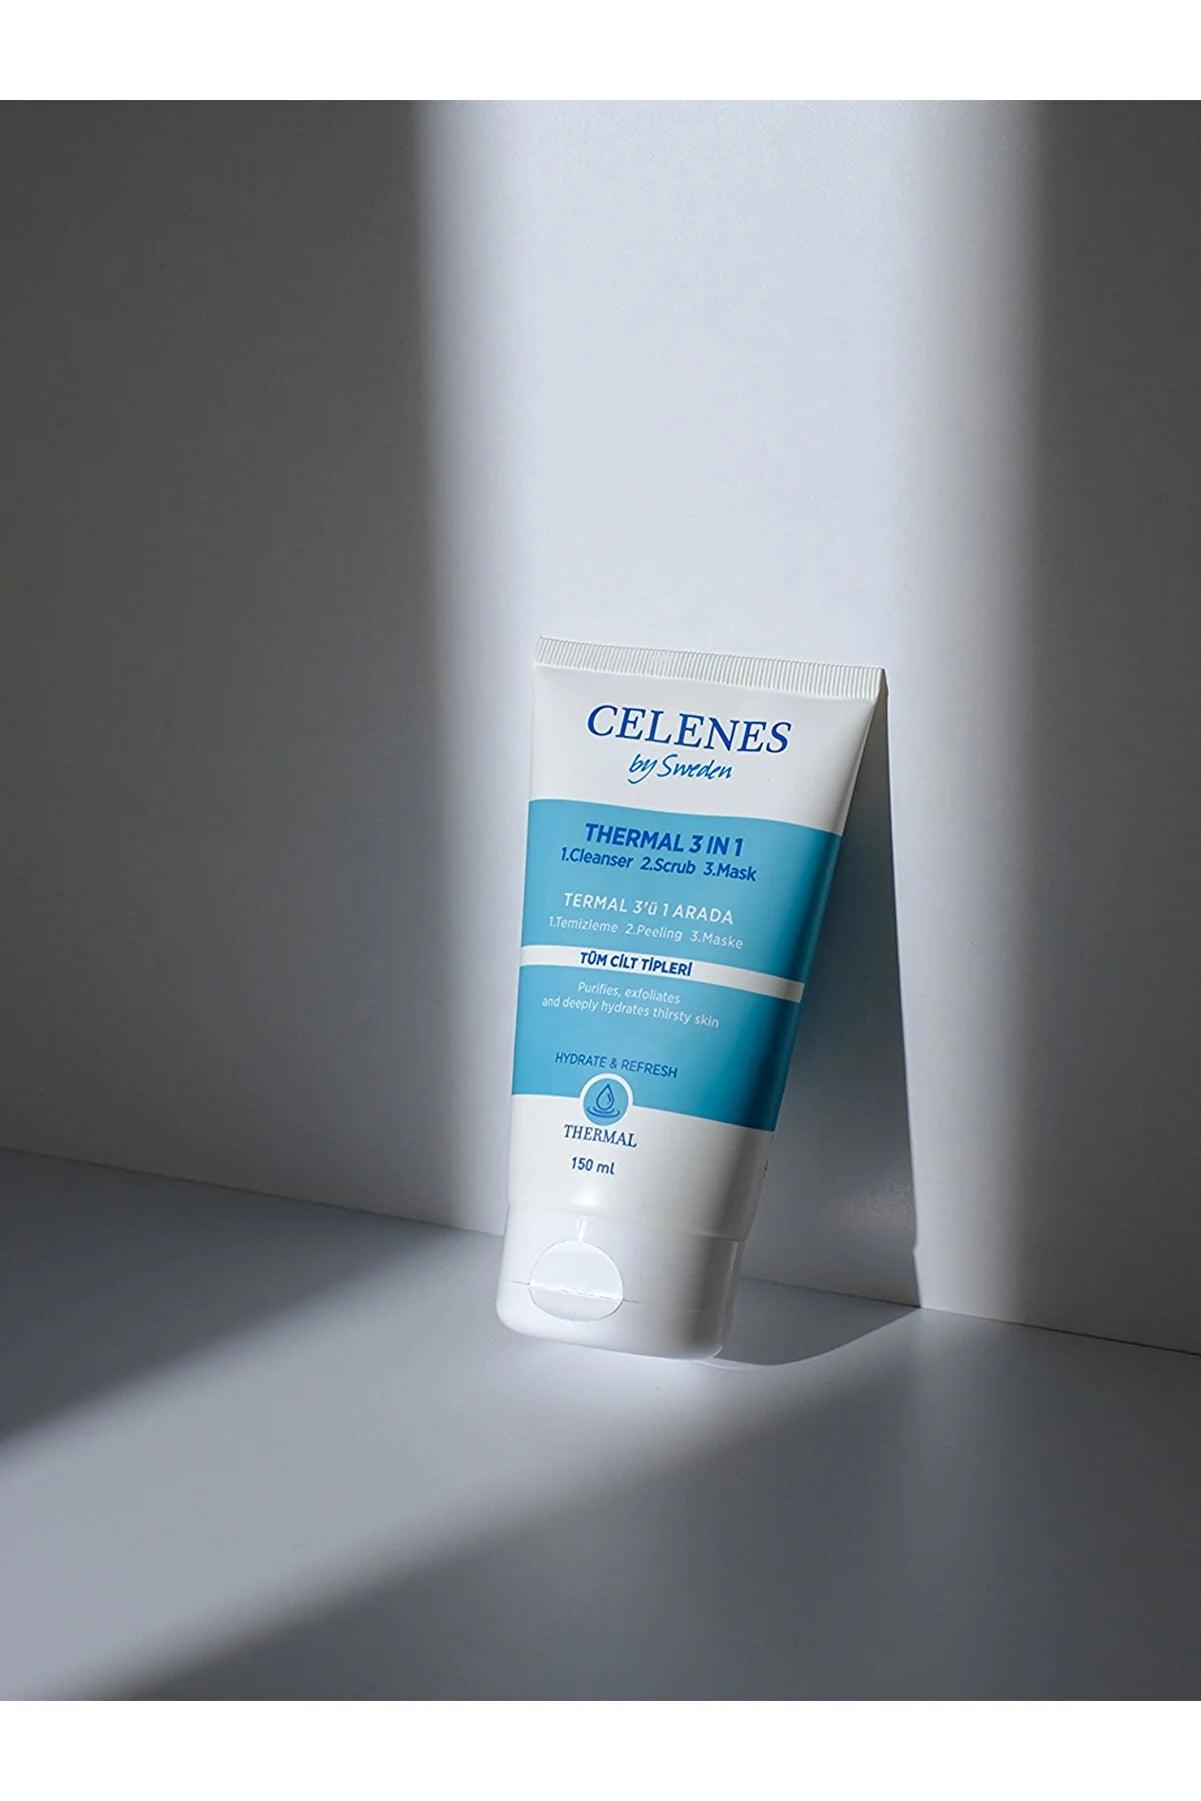 Celenes Thermal 3 in 1 Cleanse, Peeler, and mask 150 ml - Mrayti Store